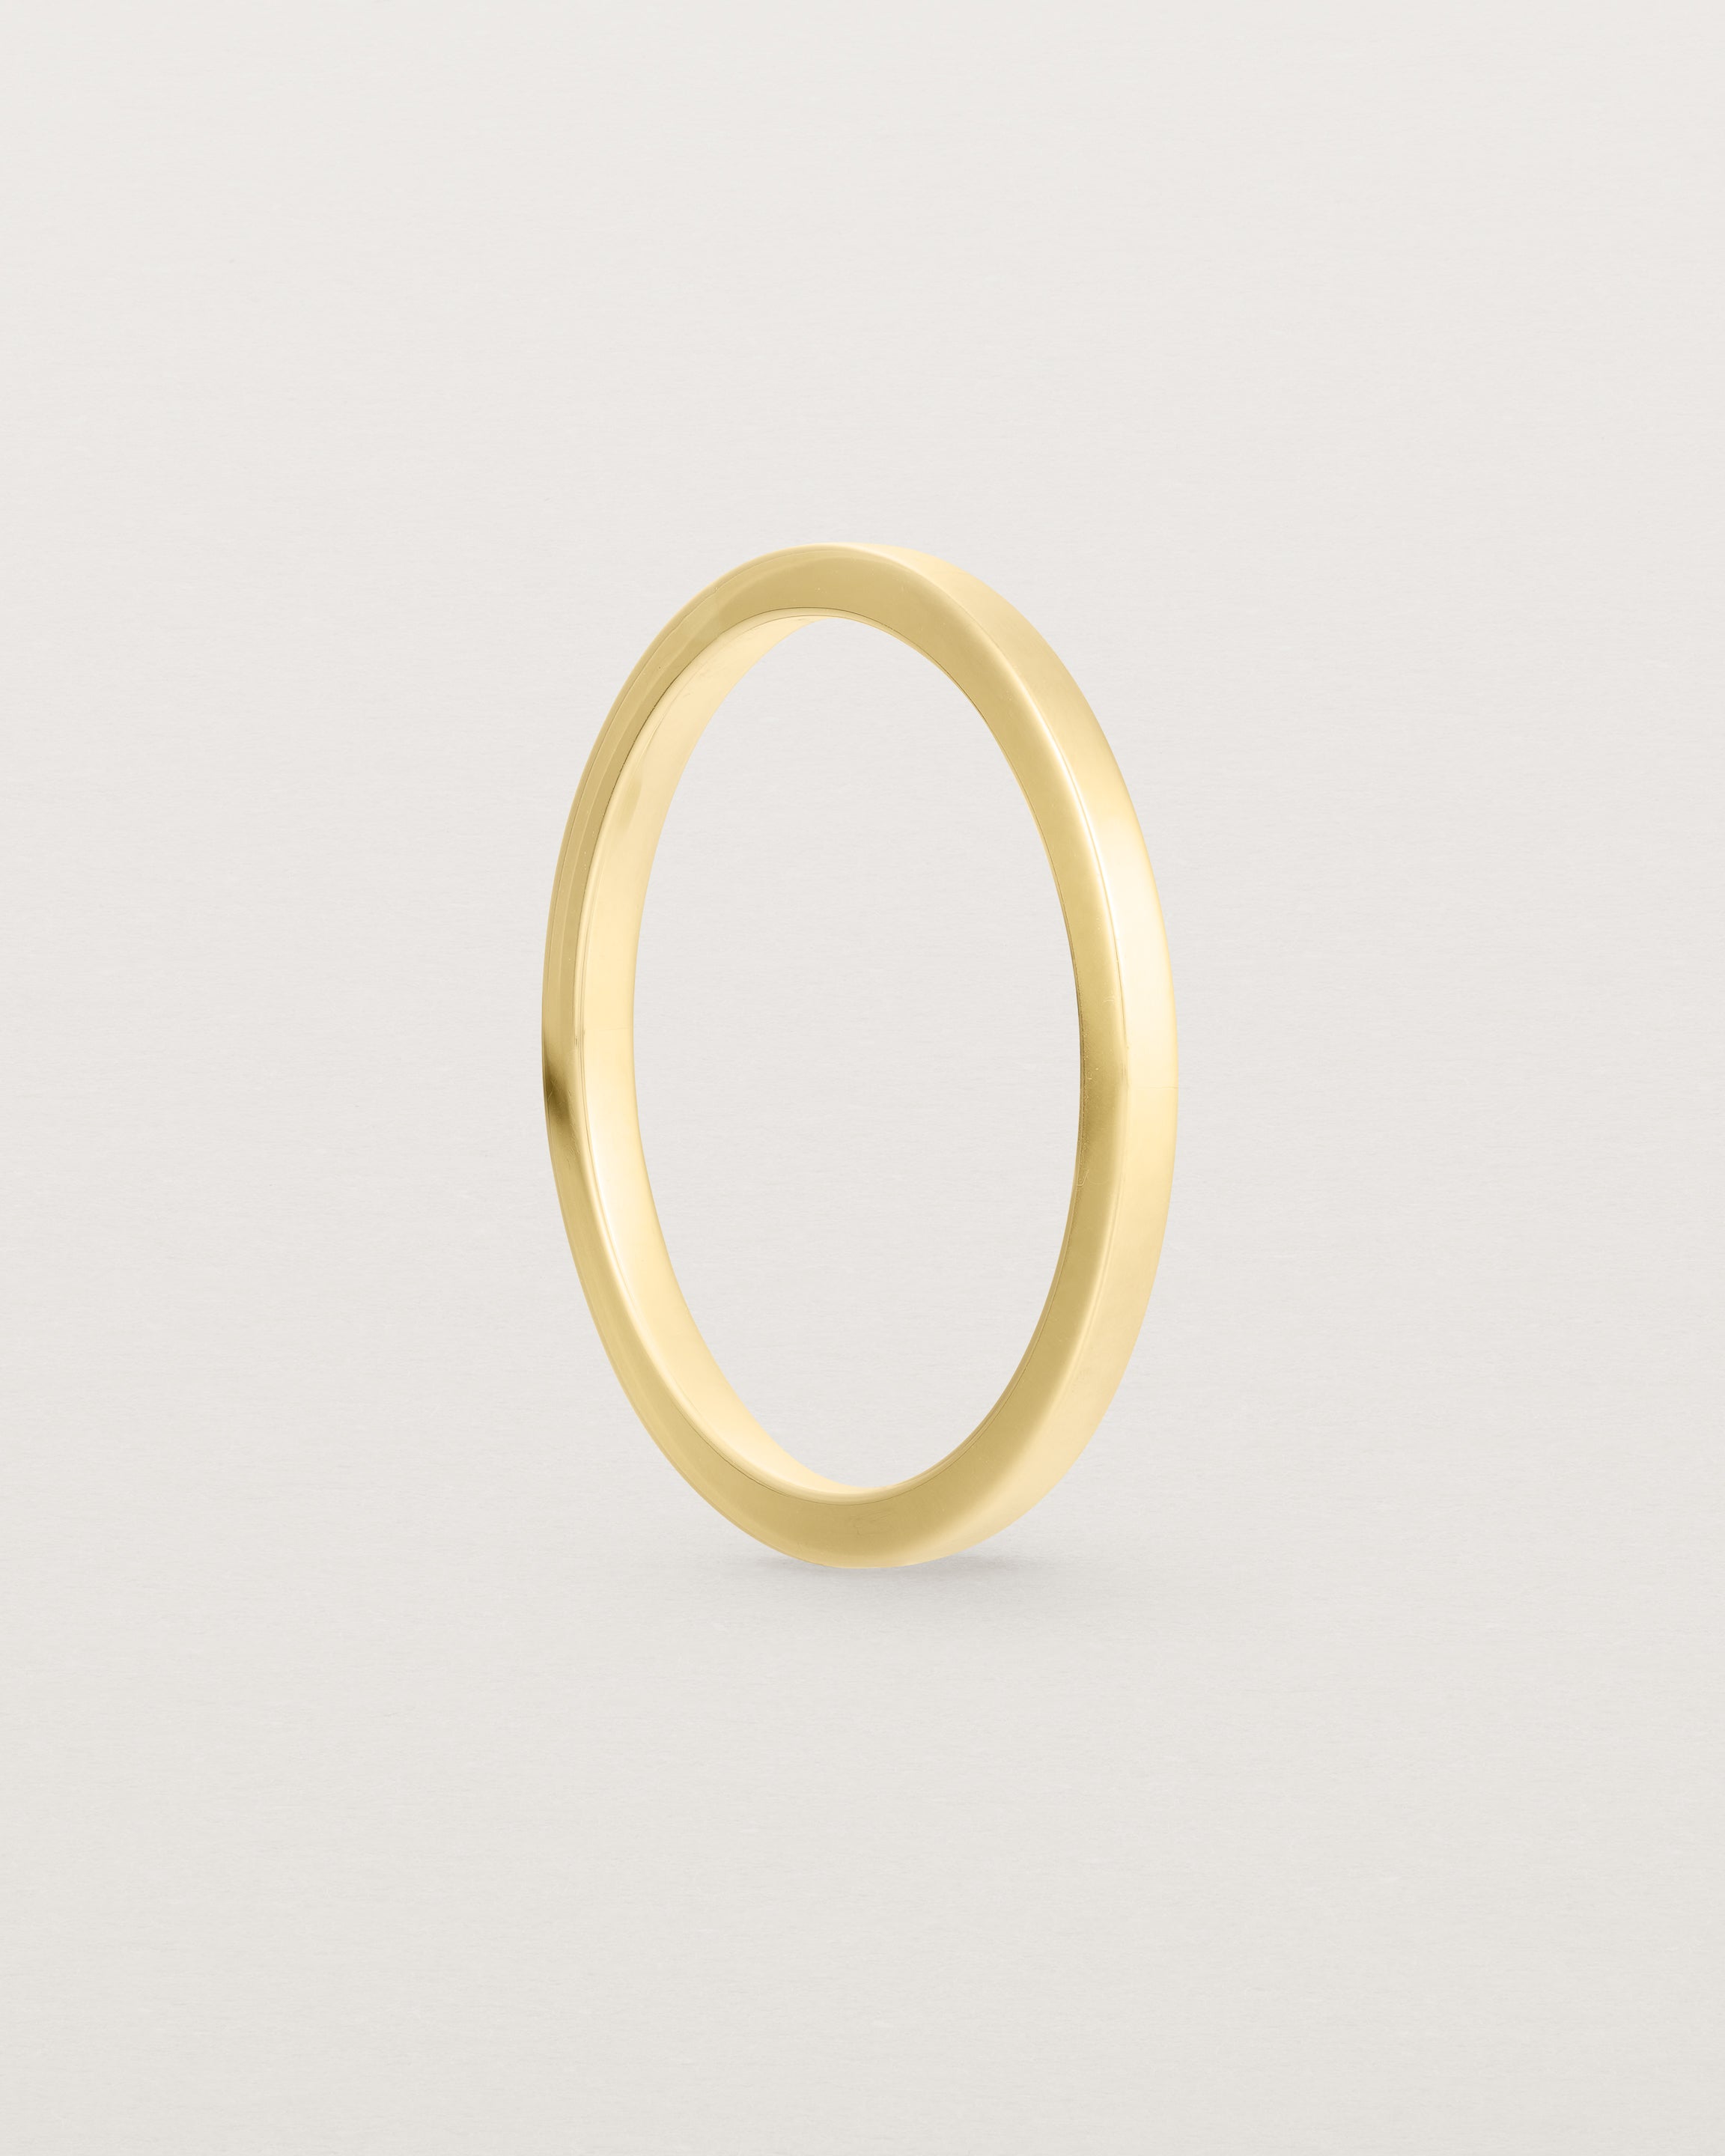 Our 1.5mm square wedding band in yellow gold